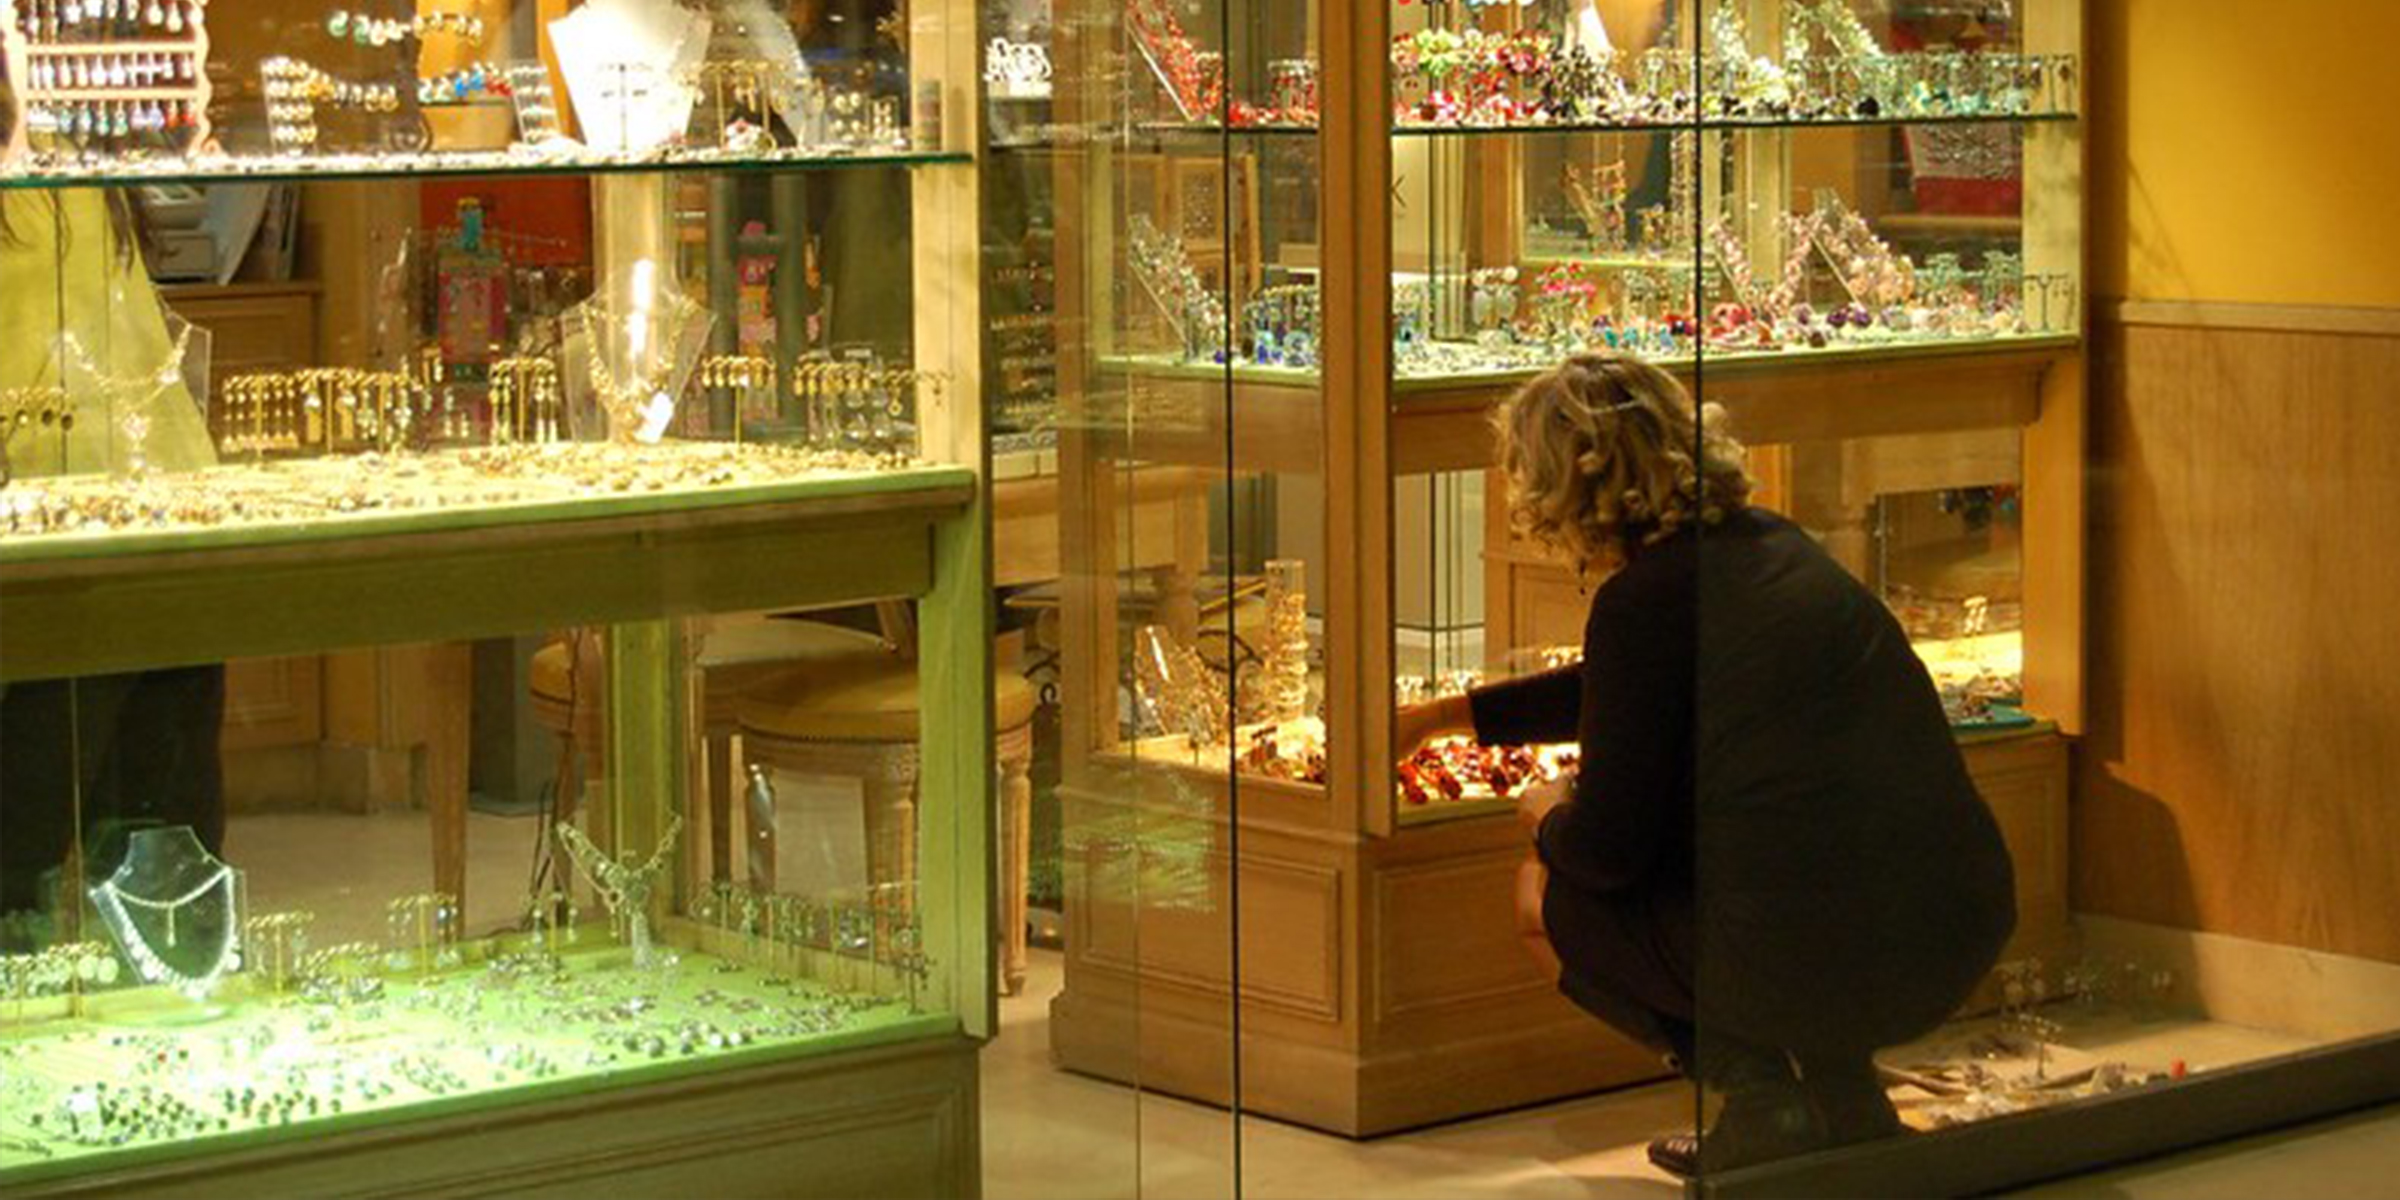 A woman in a jewelry store | Source: flickr.com/anniejay/CC BY-SA 2.0